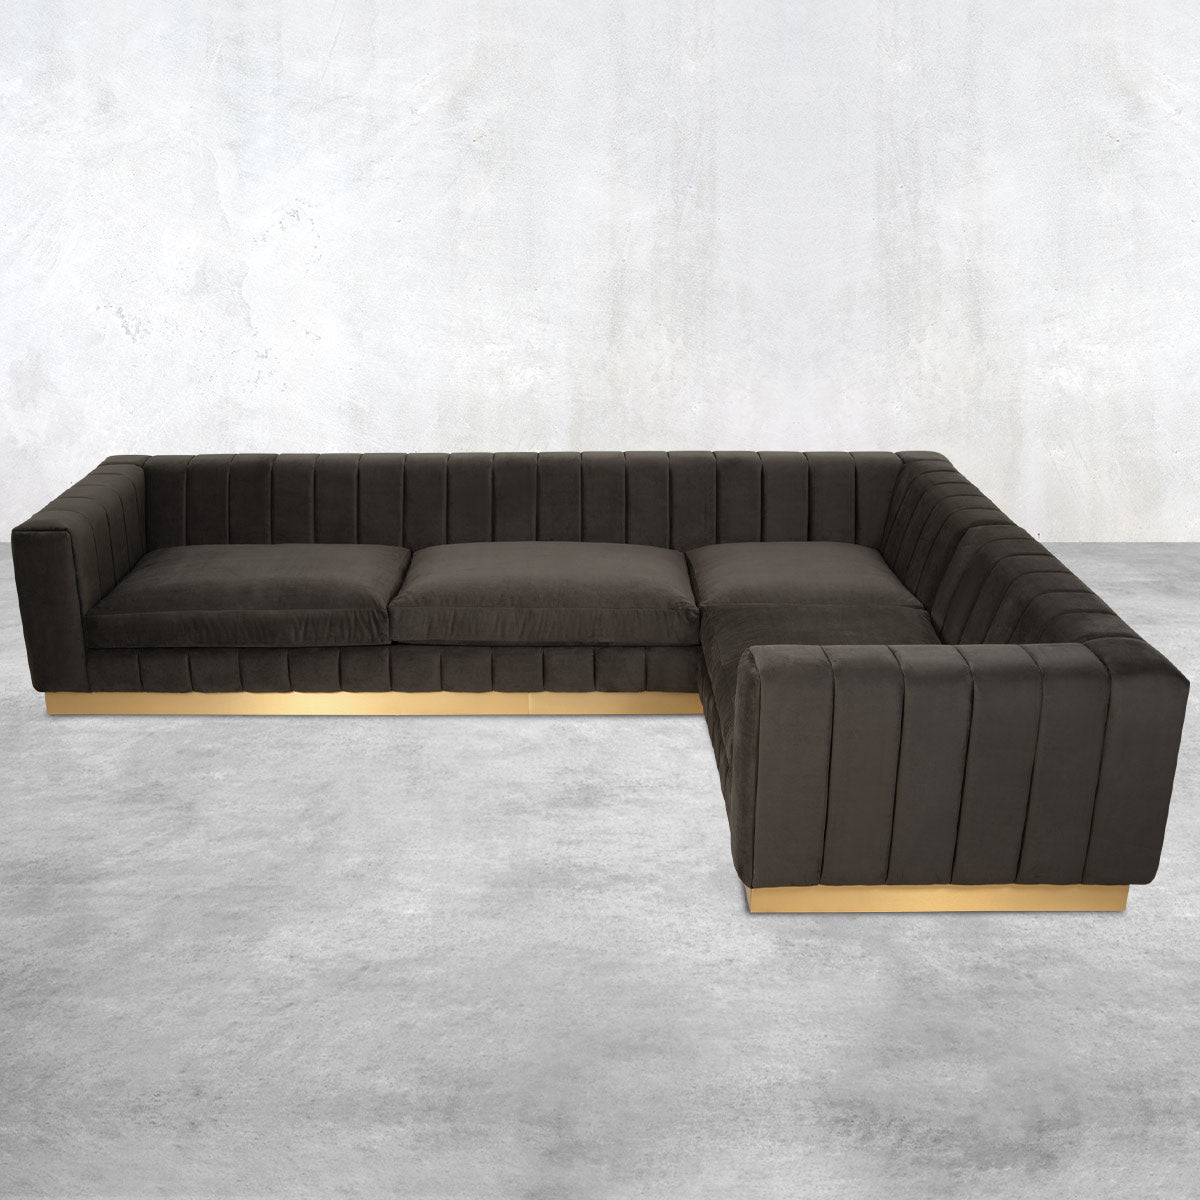 Inside Out Monaco Sectional